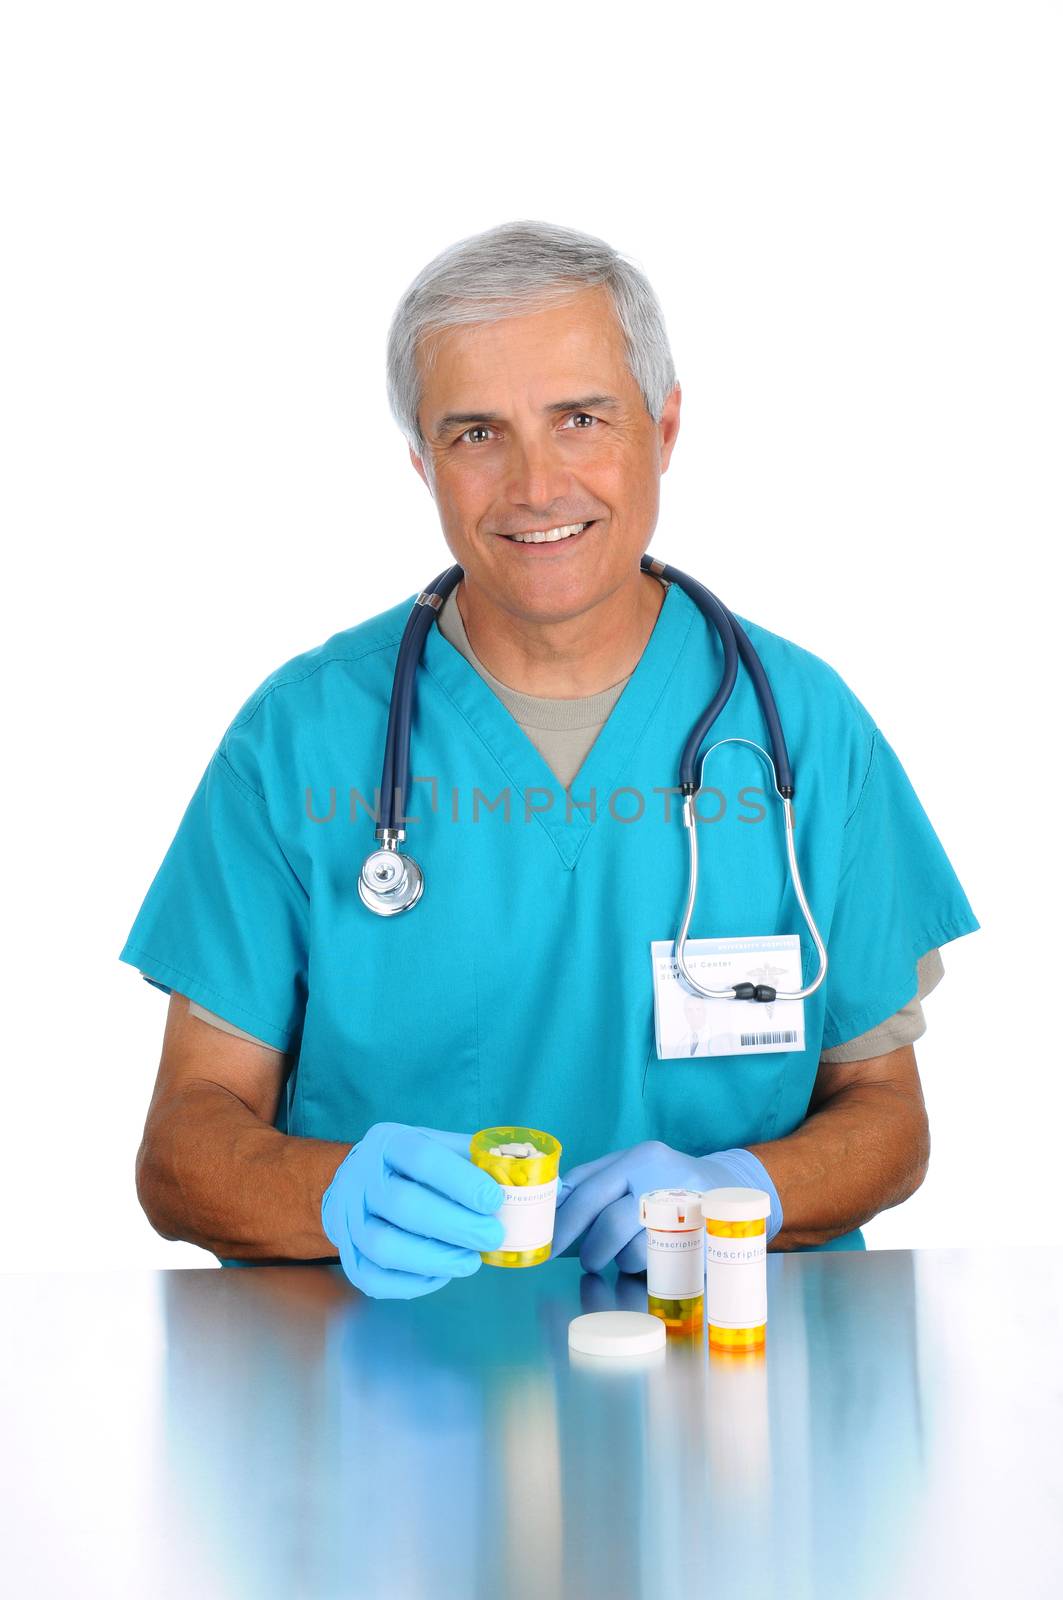 Middle aged doctor wearing scrubs and a stethoscope seated at a counter holding a prescription bottle full of pills. Vertical format isolated on white.